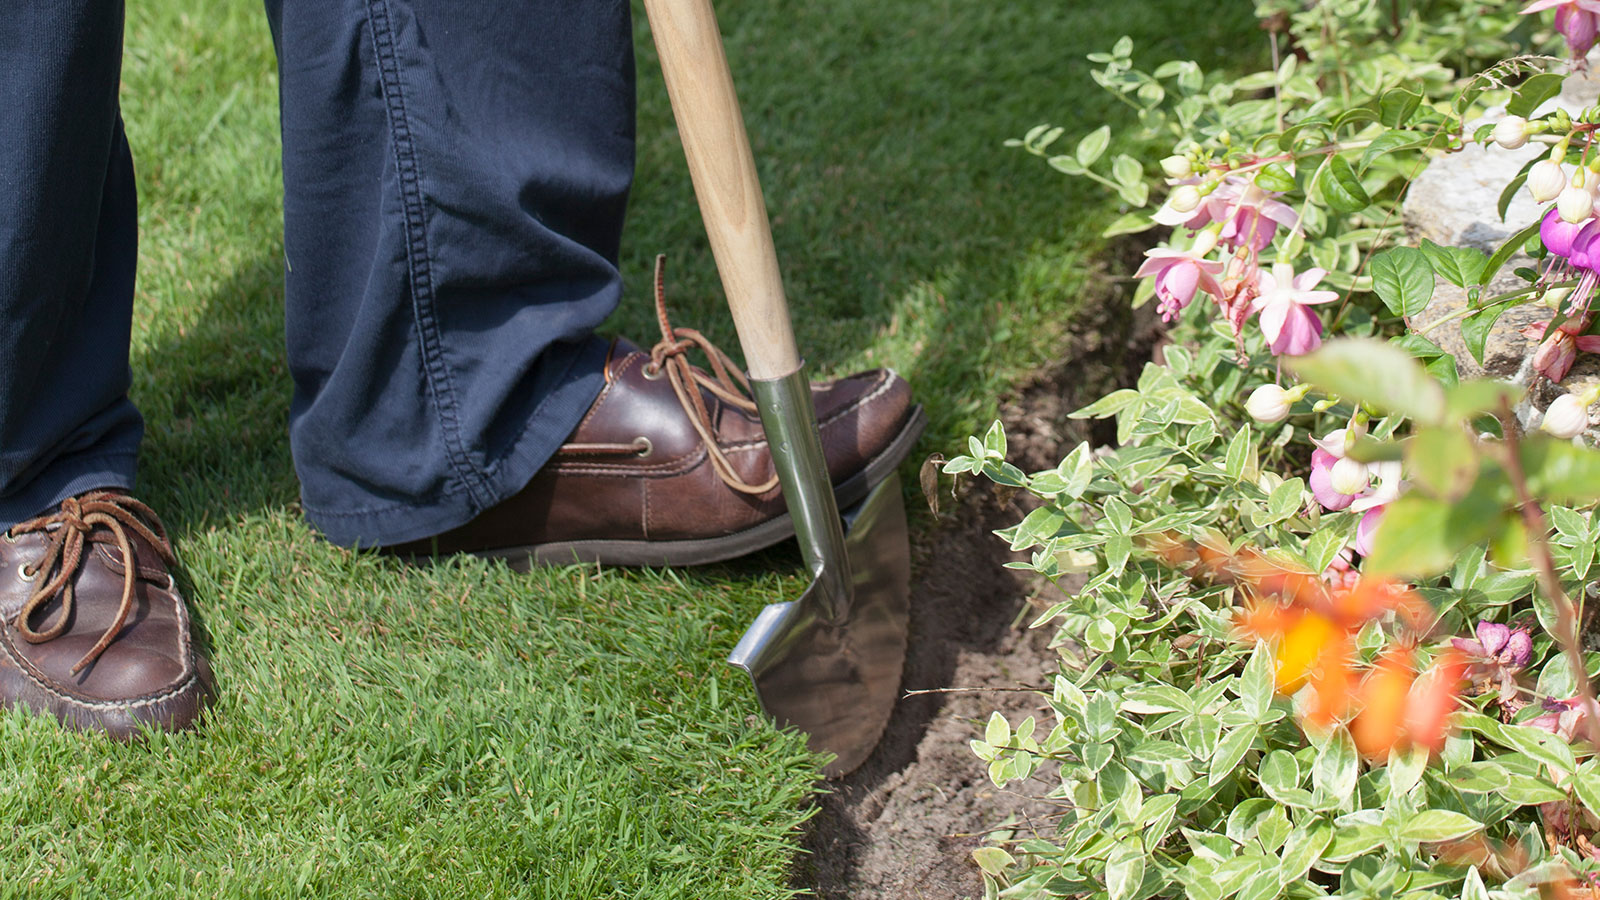 How to edge a lawn: for a professional finish |